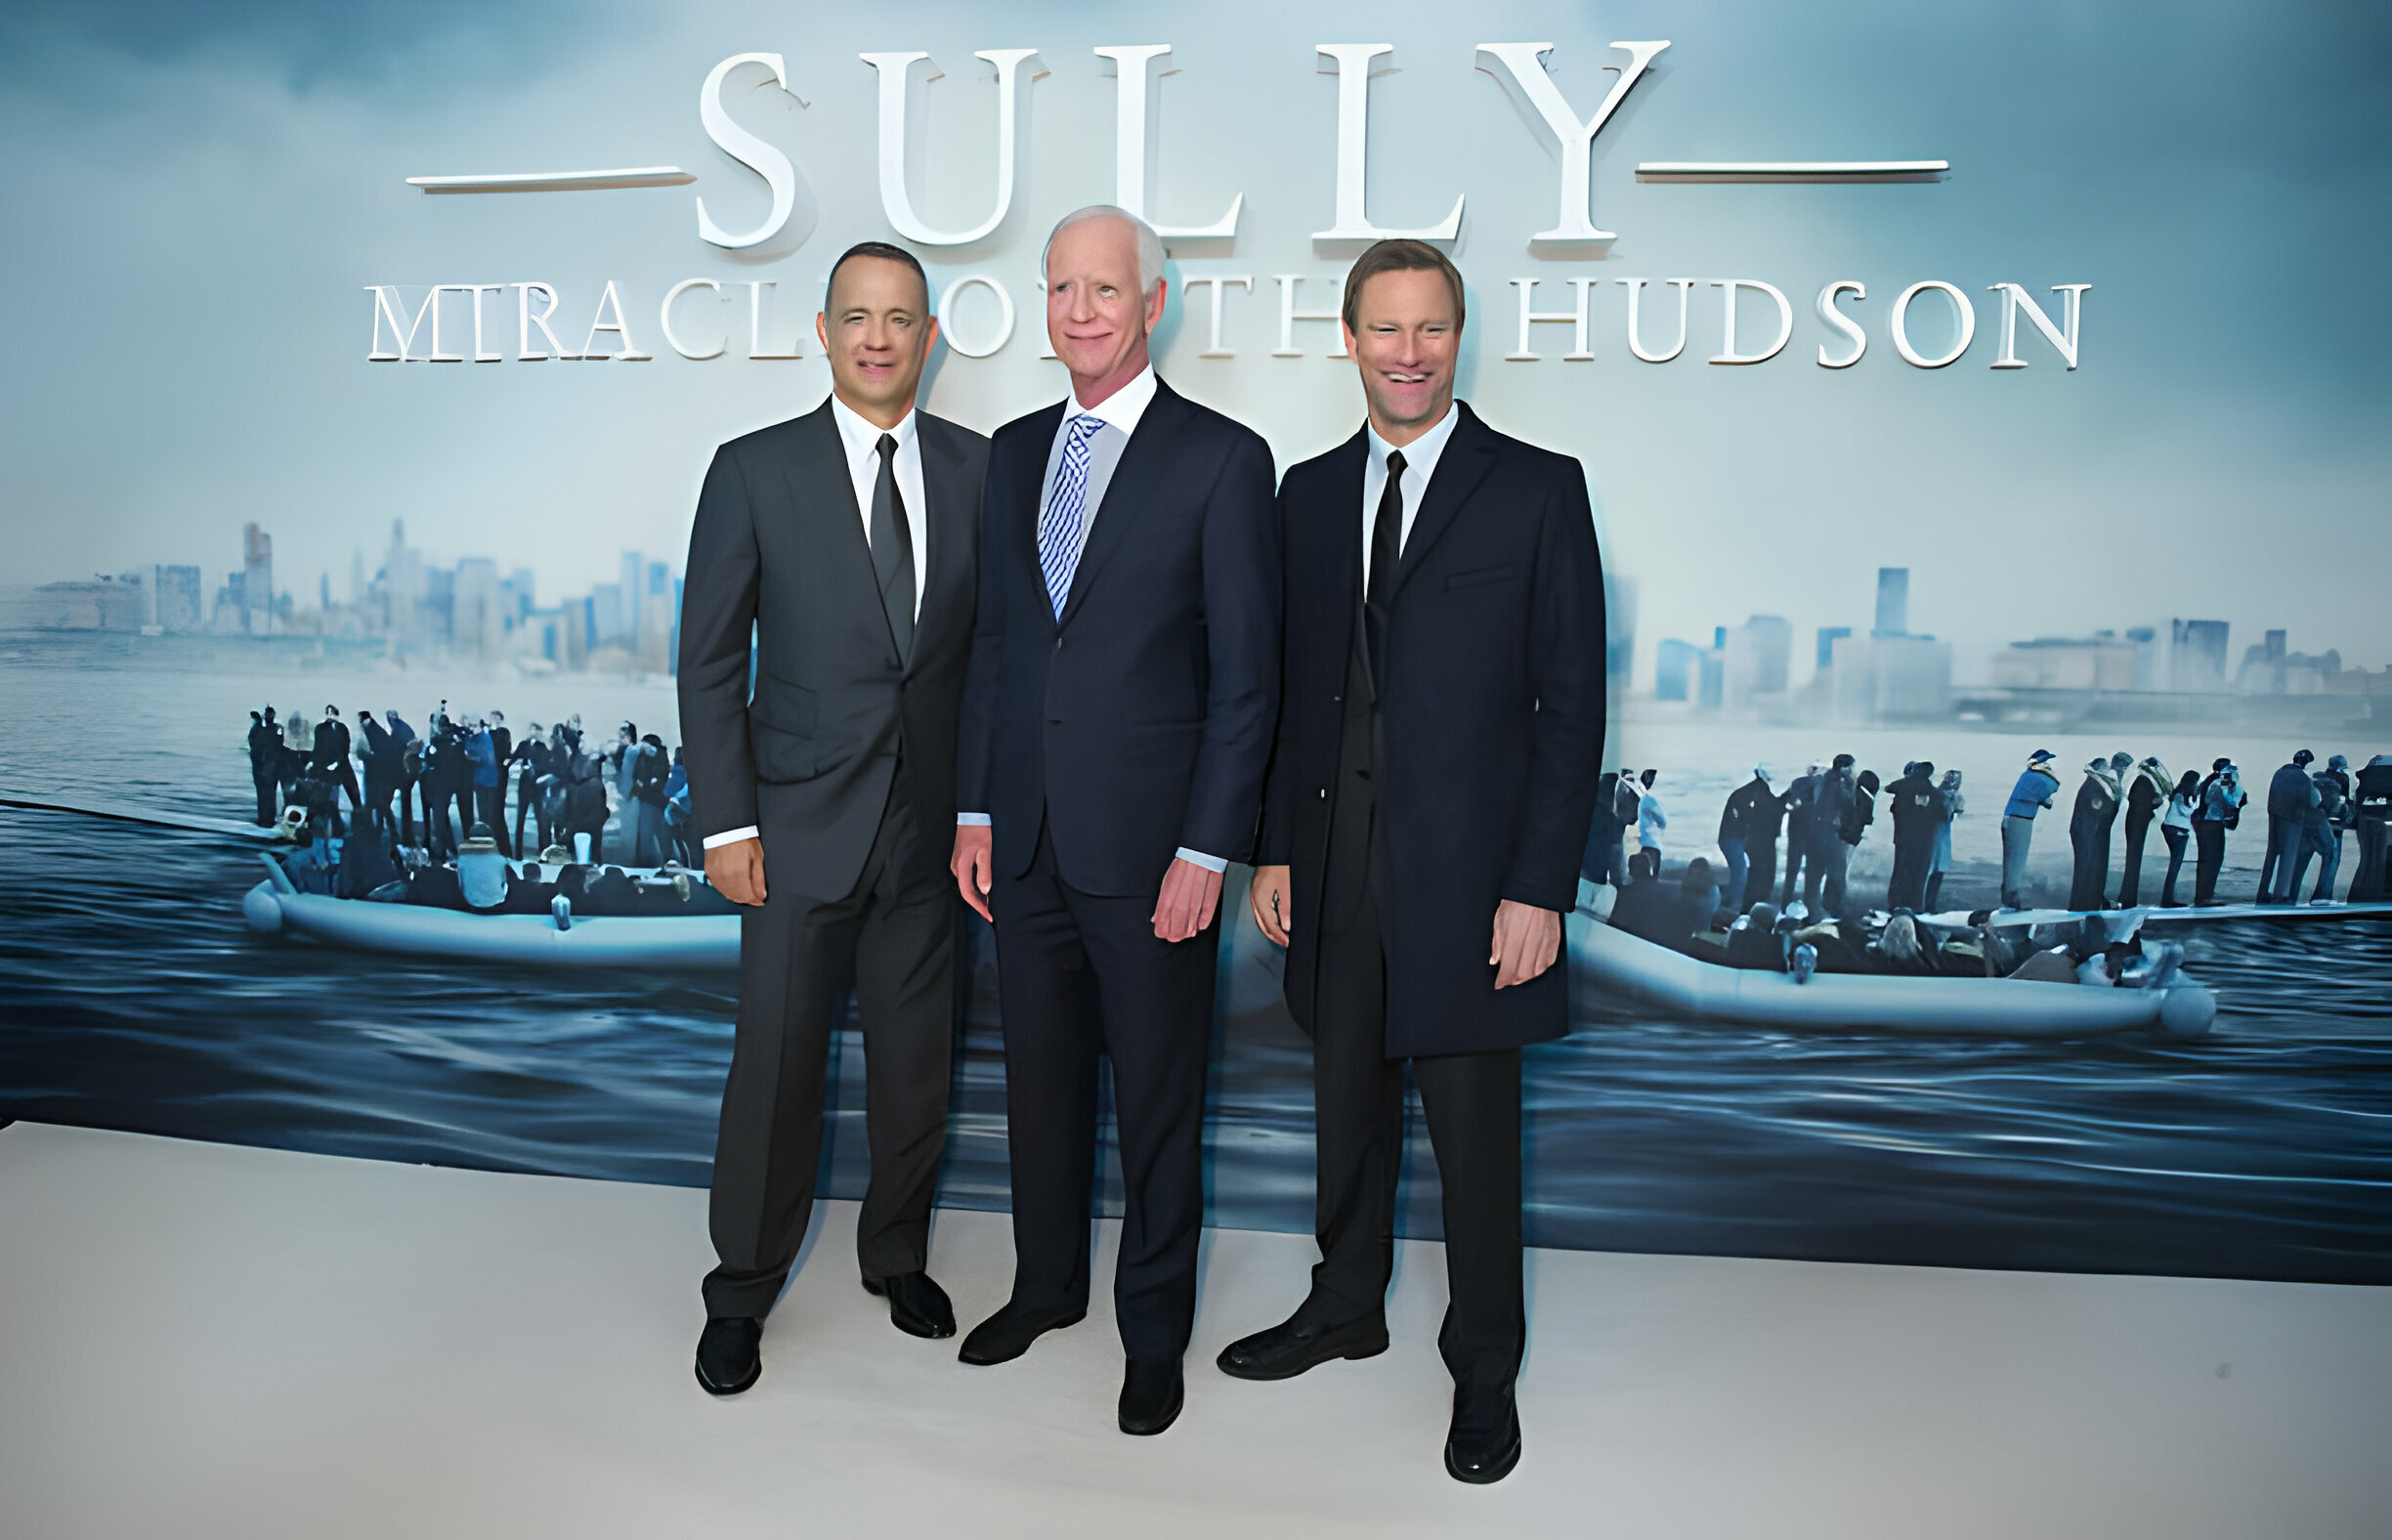 How Much Did Sully Get Paid for the Miracle on the Hudson Movie